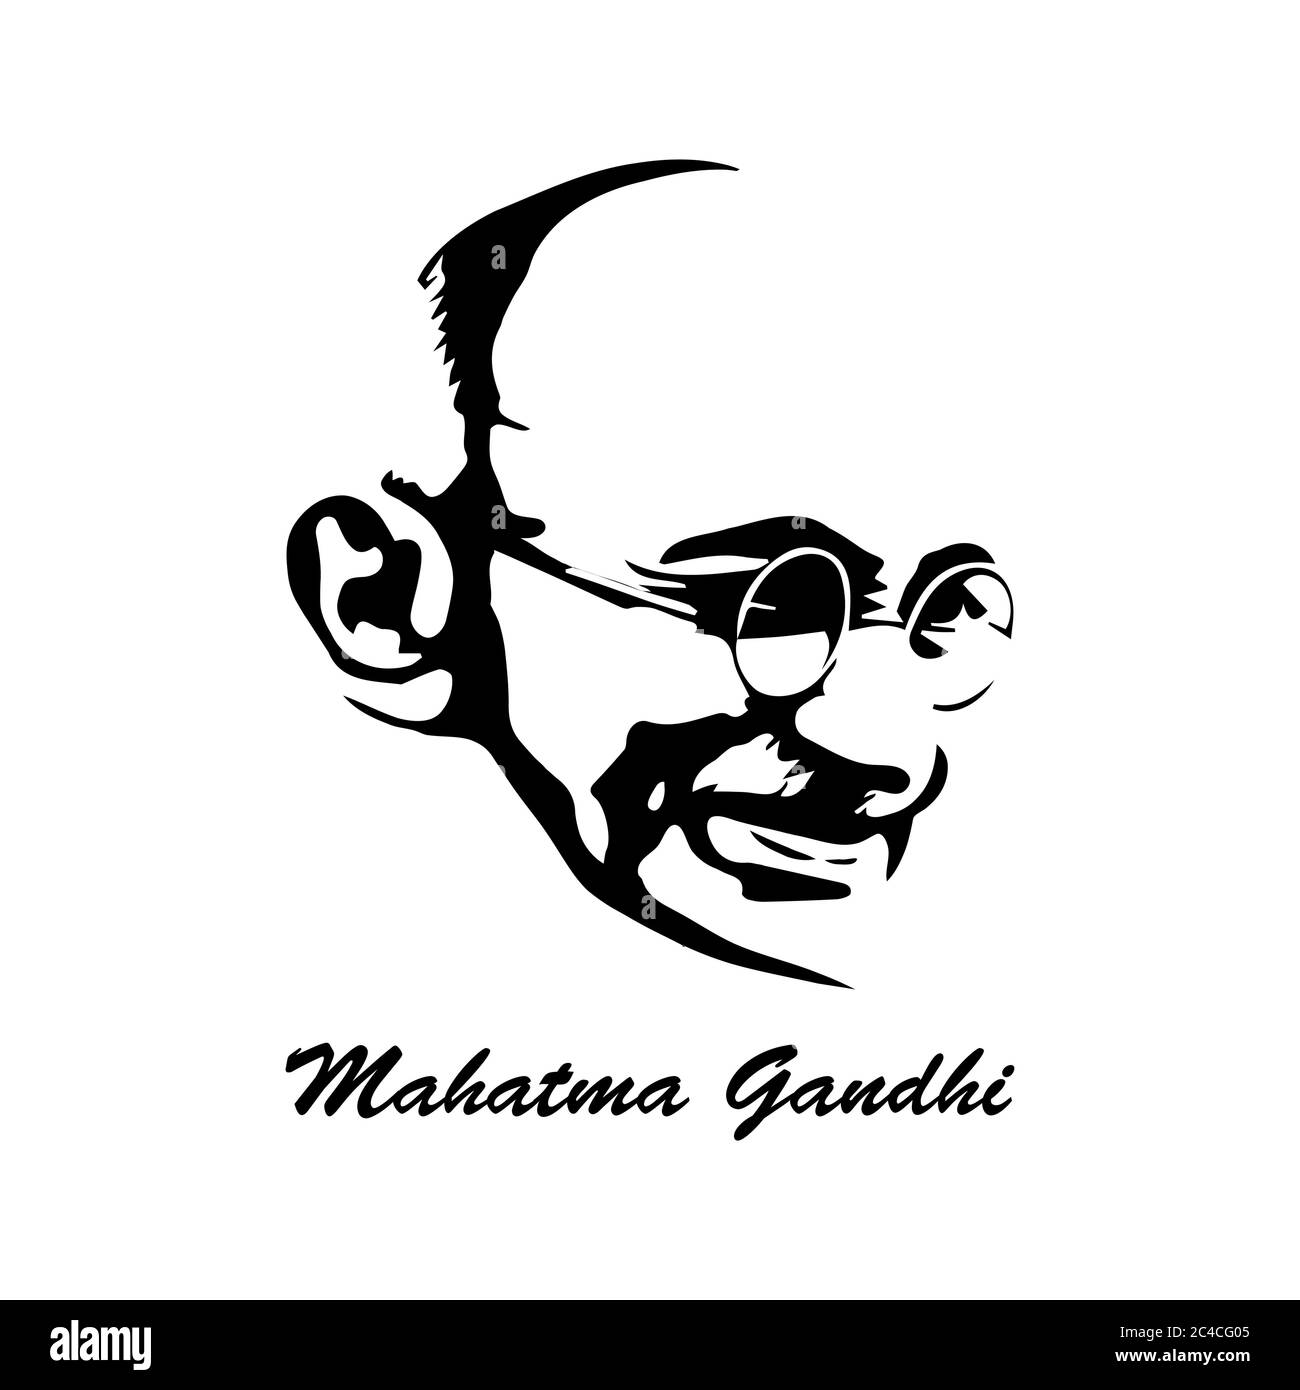 Vector illustration of Mohandas Karamchand Gandhi or mahatma gandhi, a great Indian freedom fighter who promoted non voilence. Stock Vector